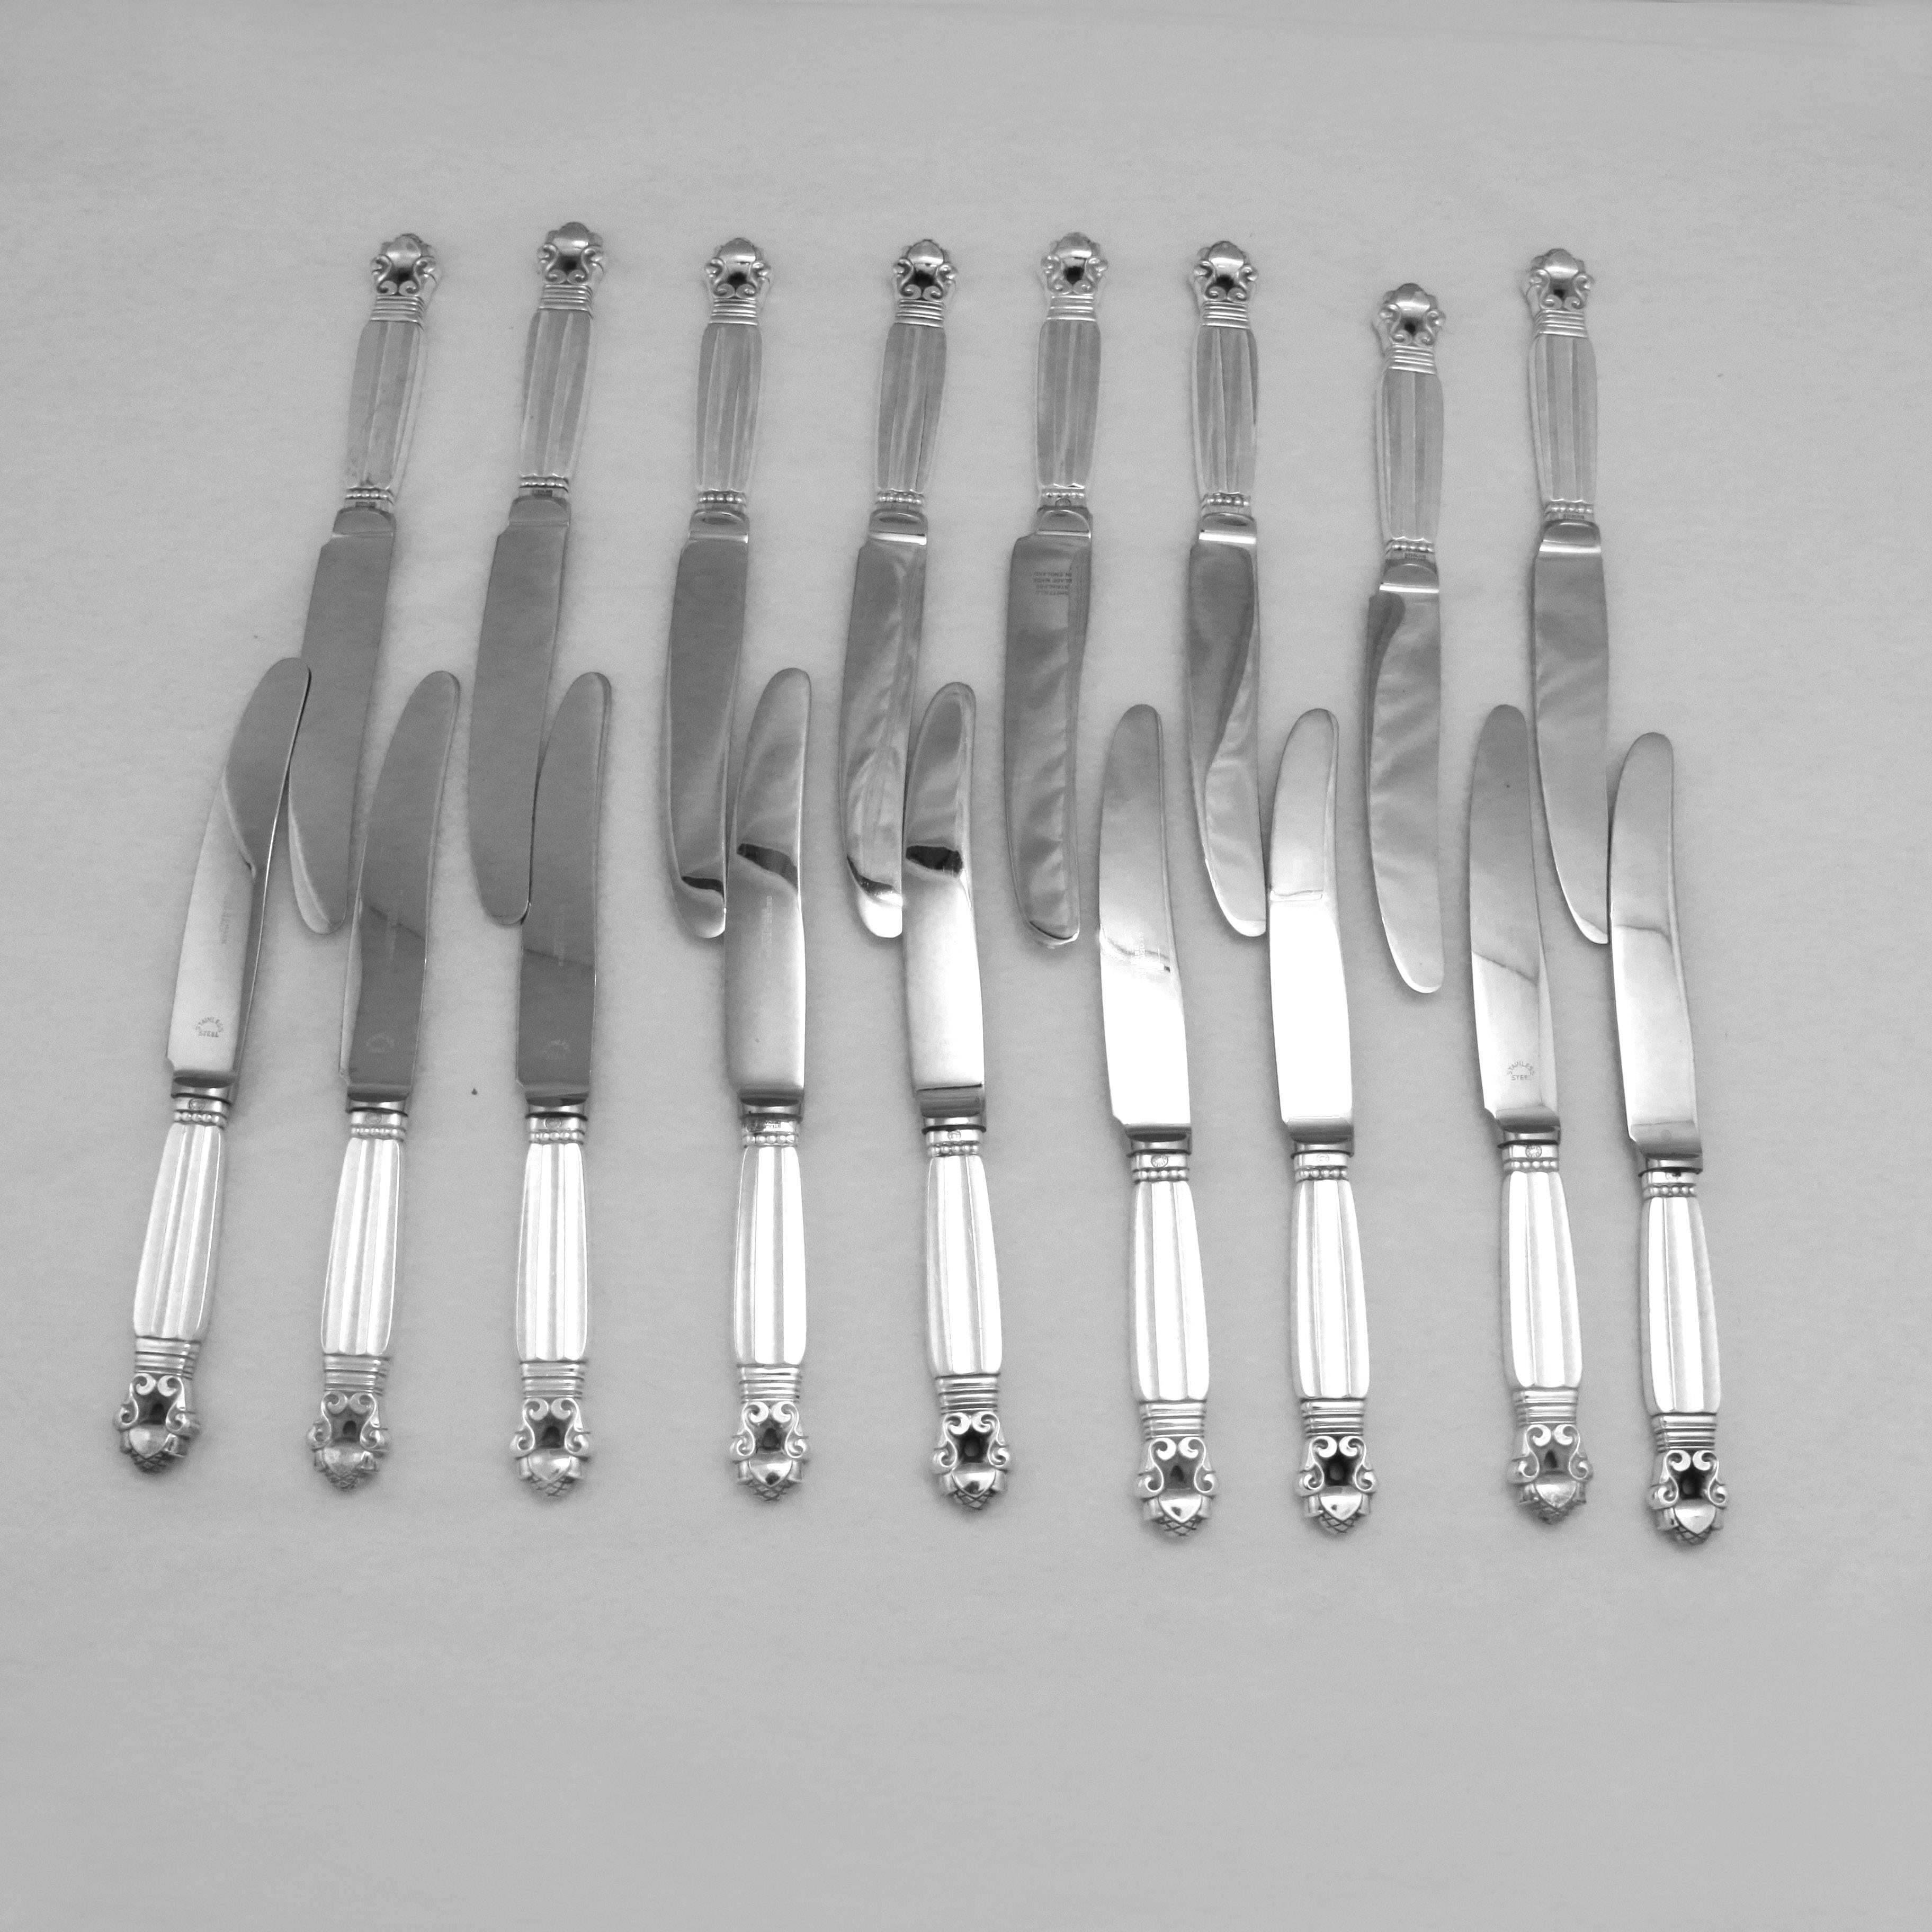 Georg Jensen Acorn Sterling Silver Flatware Set for 12, in all 126 Pieces 1